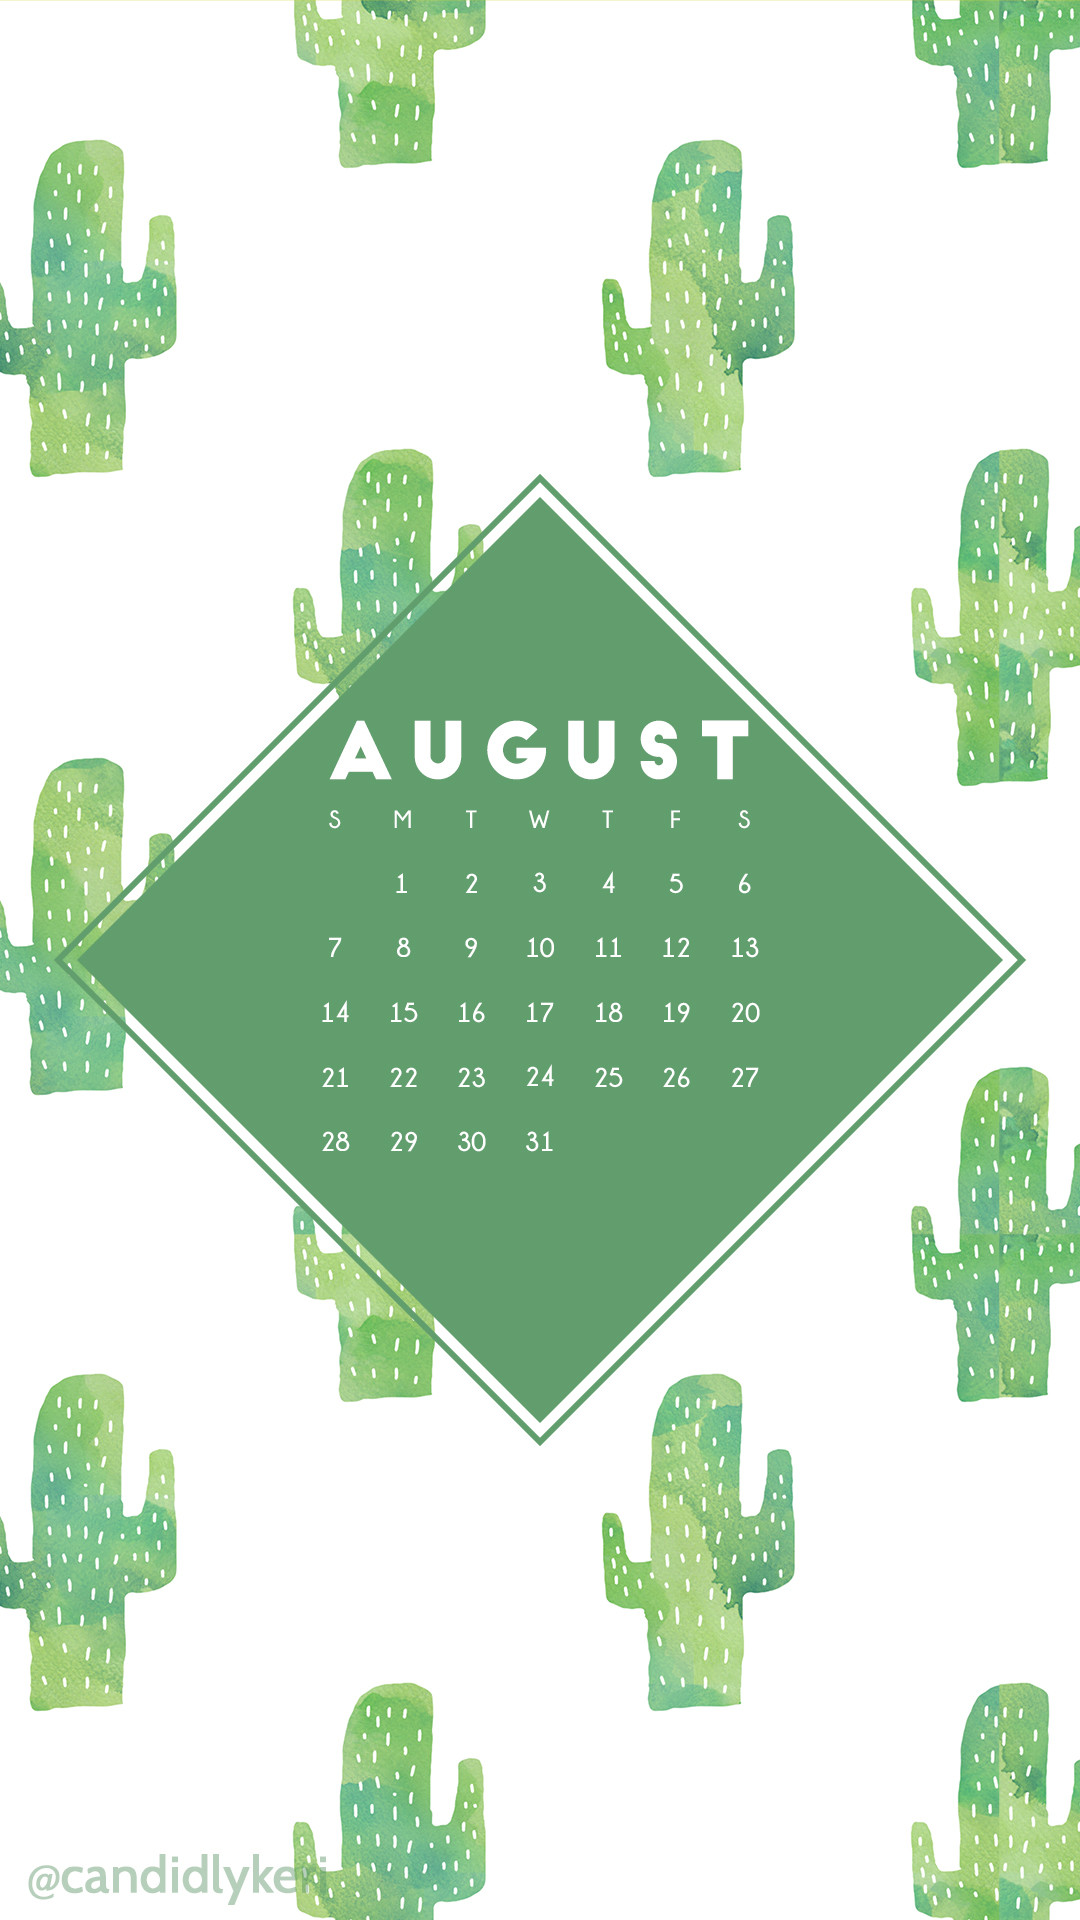 1080x1920 Cactus fun cacti green watercolor background August calendar 2016 wallpaper  you can download for free on